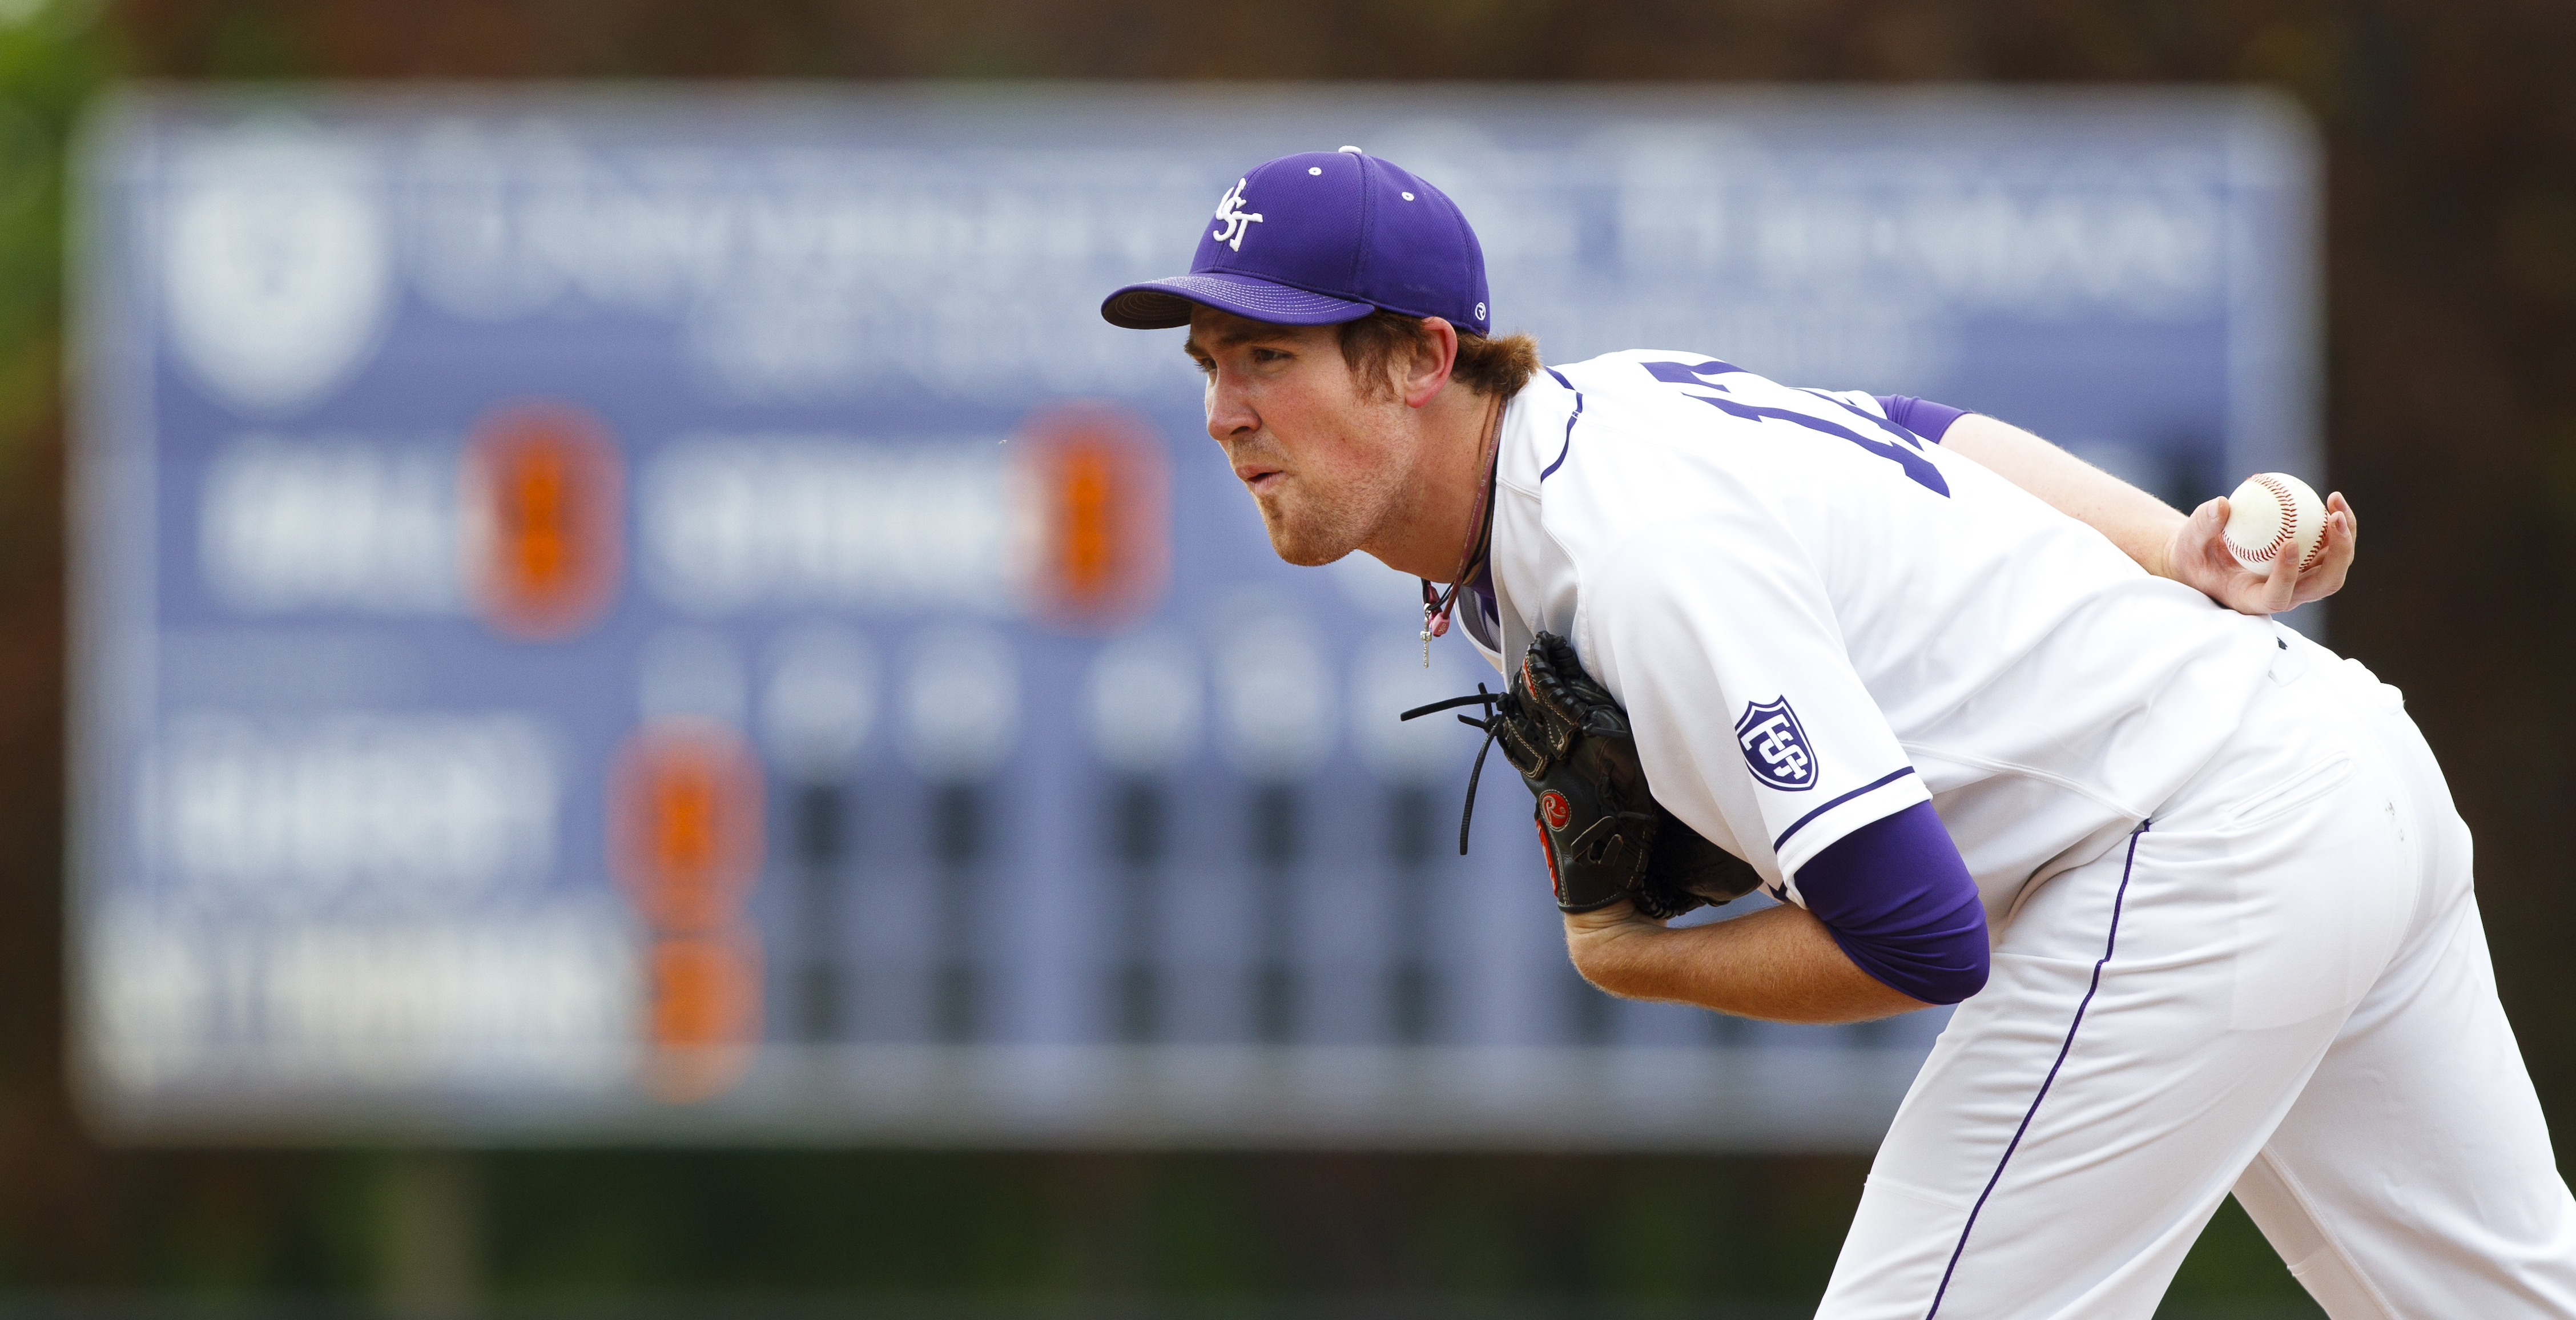 Steve Maher, St. Thomas' All-American pitcher and record-holder, is baffling D-I and D-II hitters in the Northwoods League for the Waterloo Bucks. (credit: University of St. Thomas/Mike Ekern)